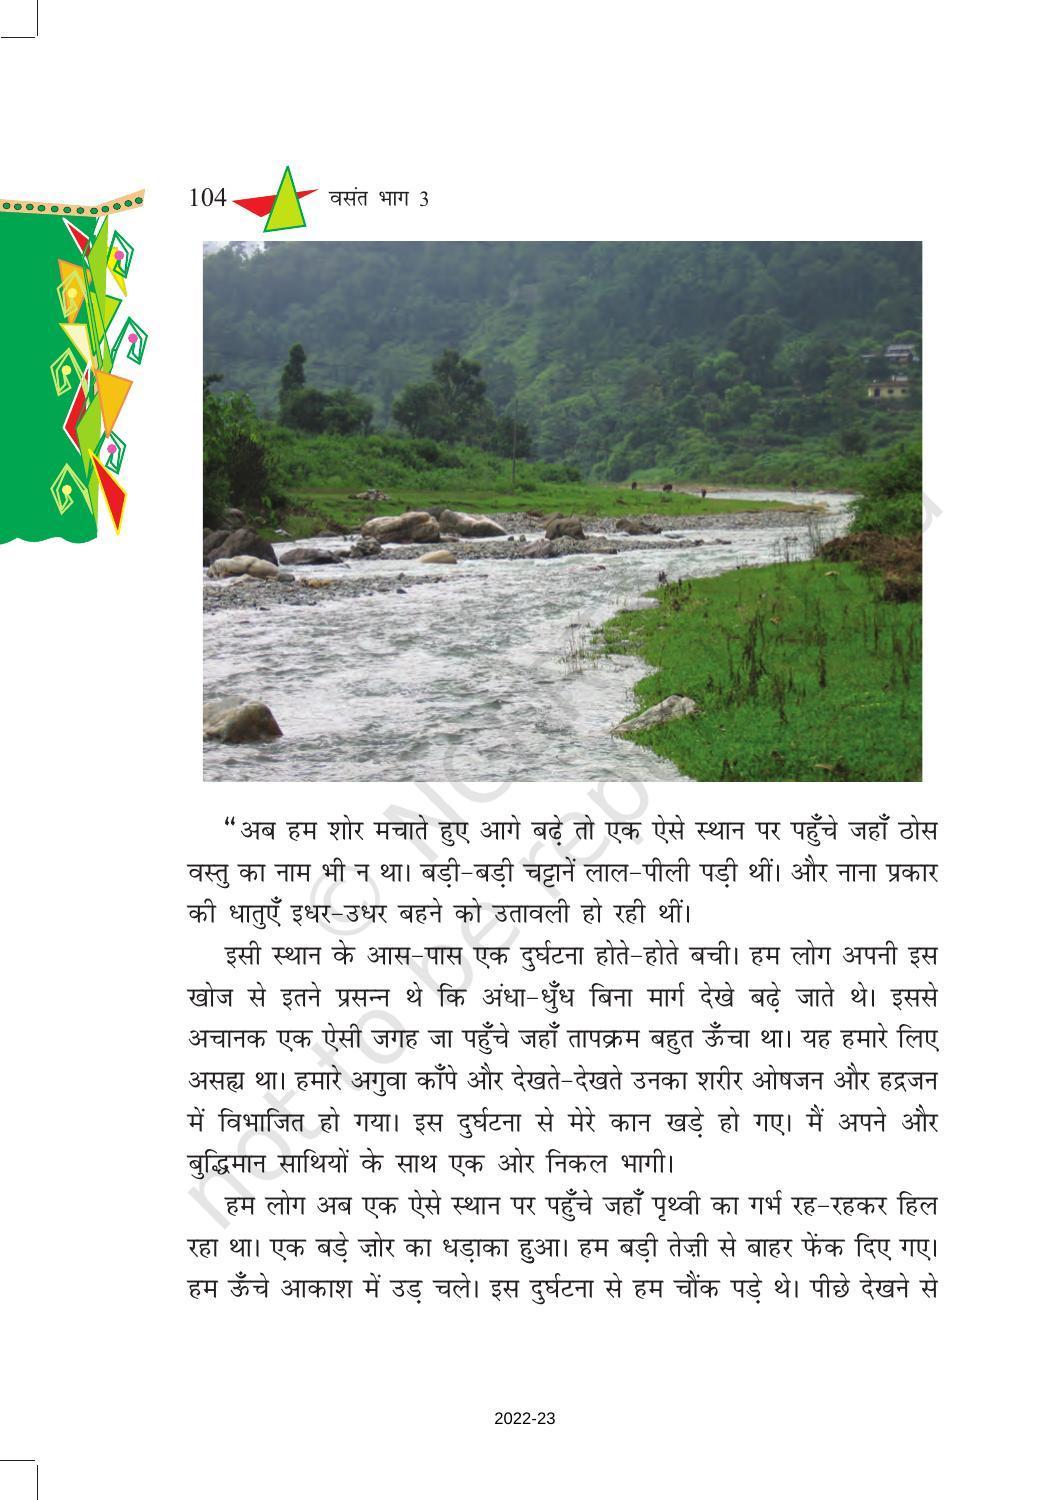 NCERT Book for Class 8 Hindi Vasant Chapter 16 पानी की कहानी - Page 7